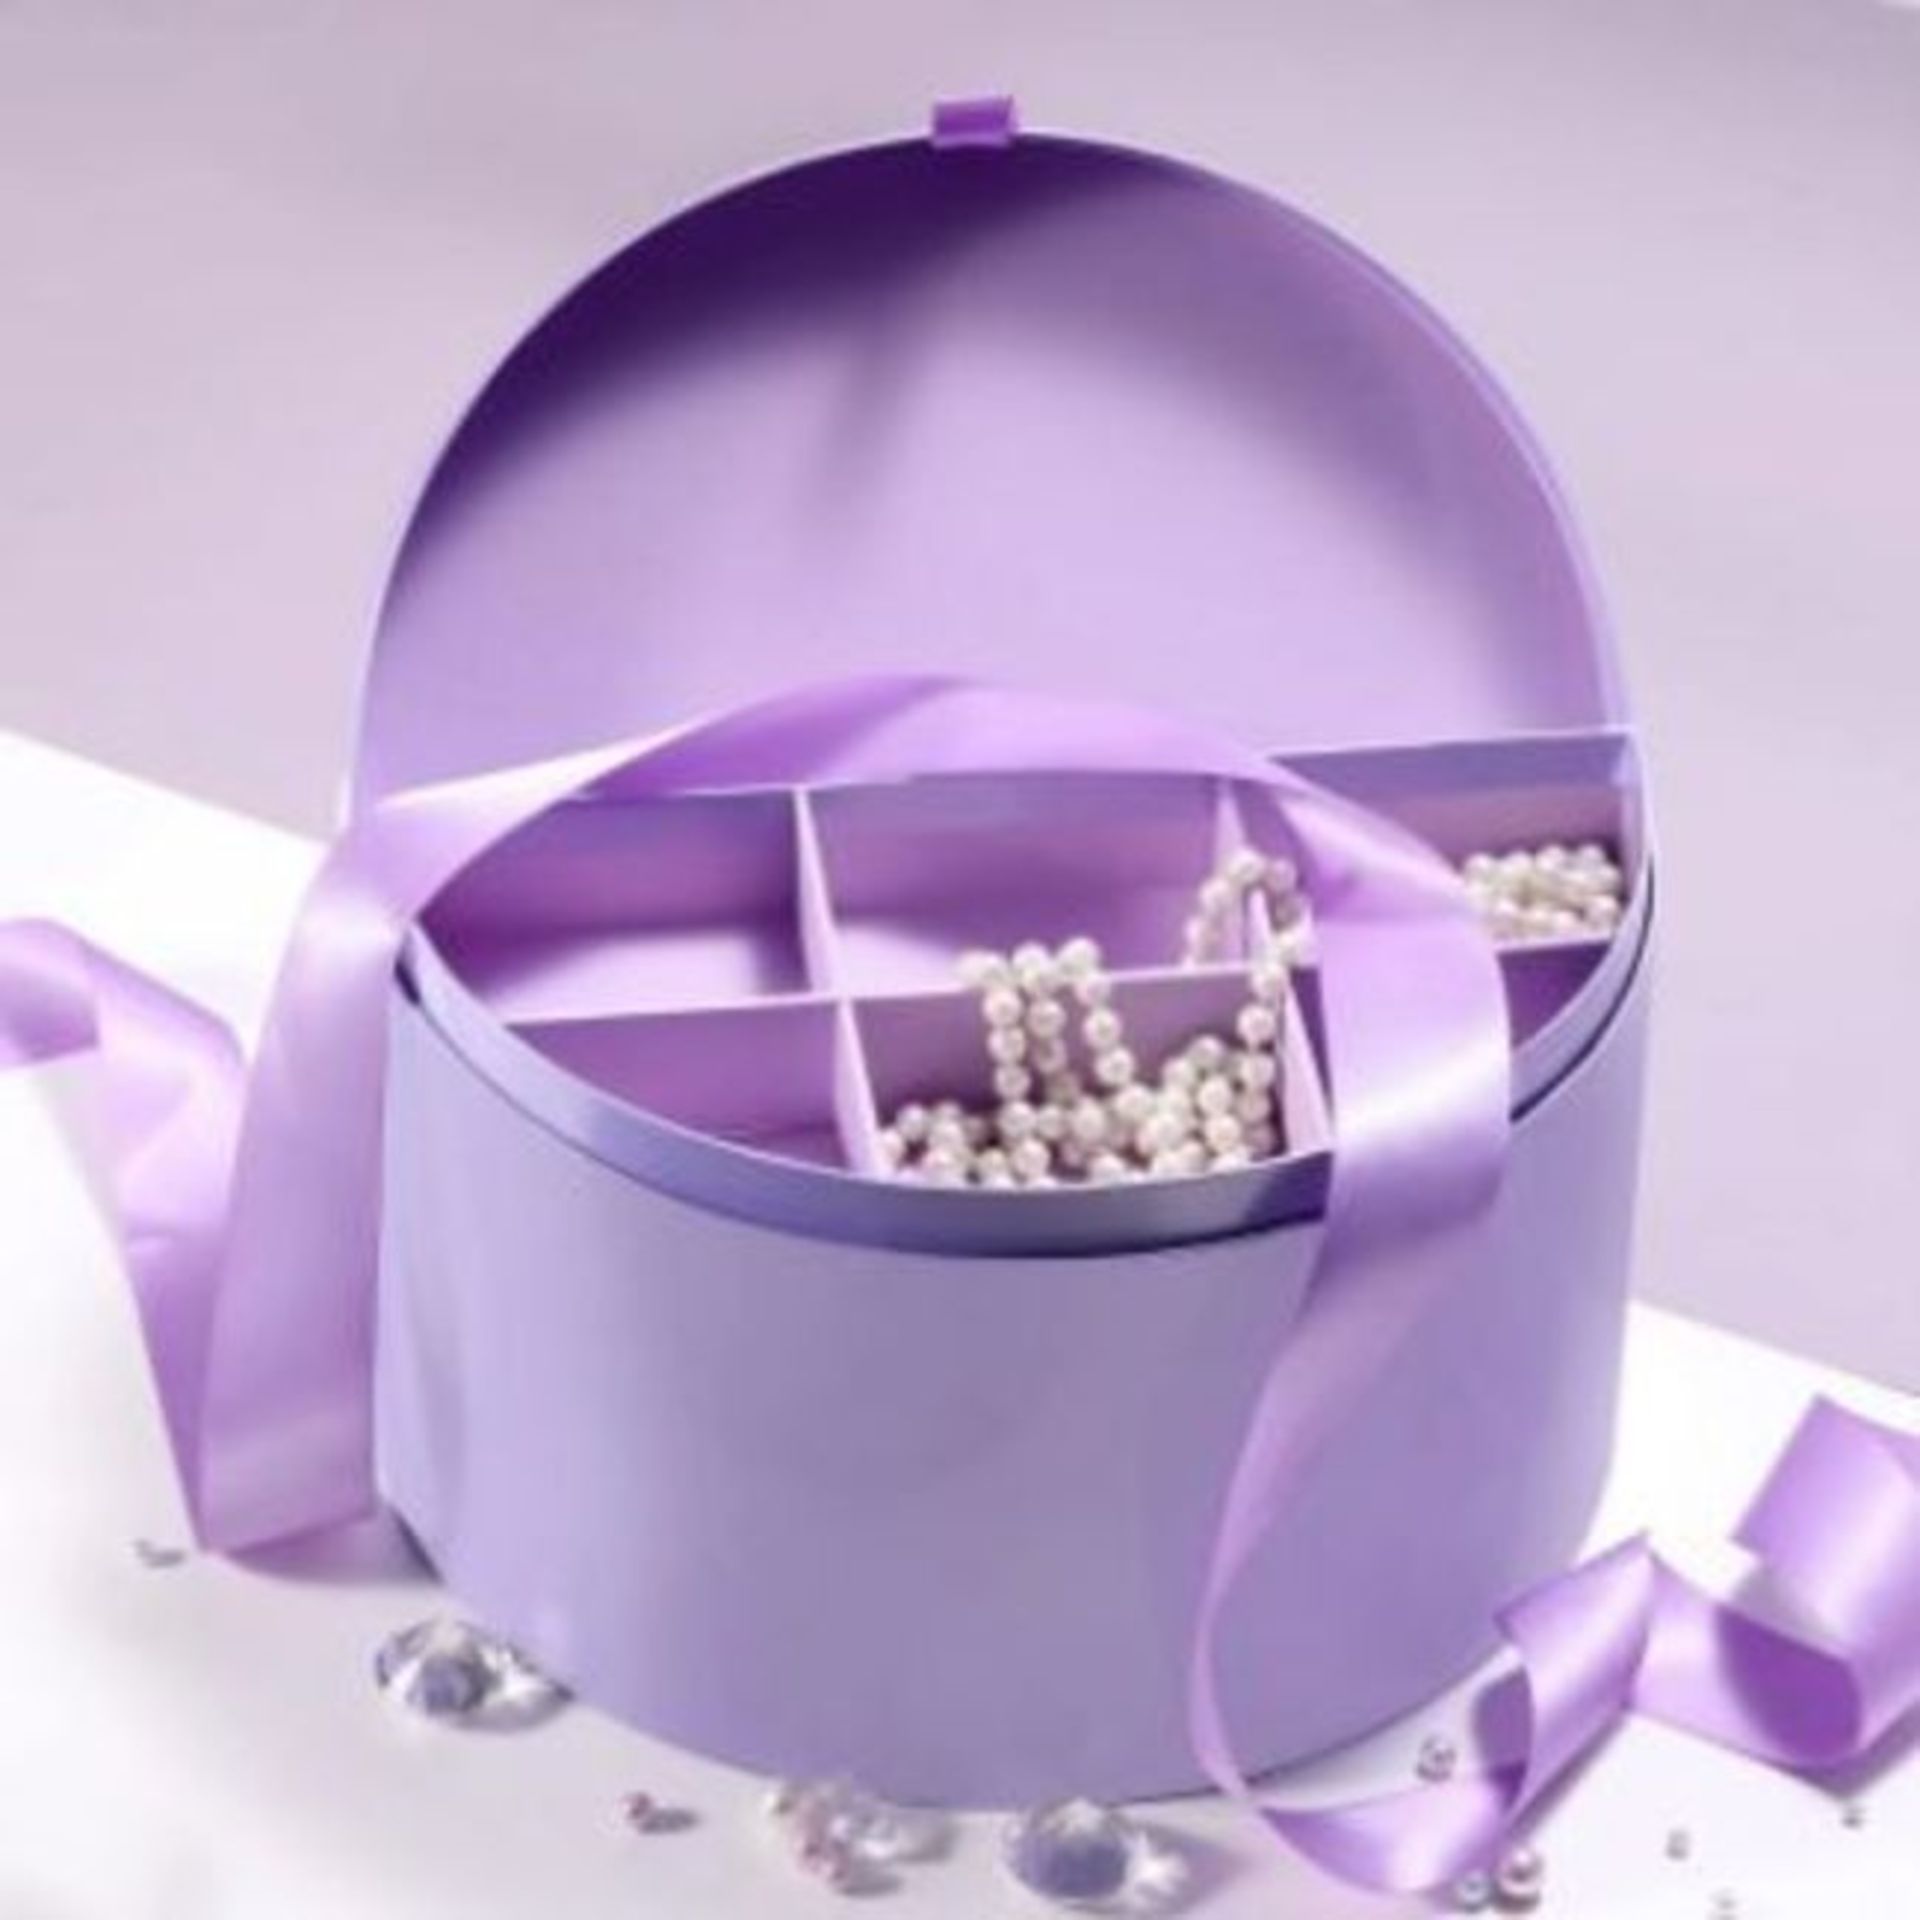 New Packaged Lavender Bath & Shower Jewellery Box. RRP £44.99 Each. 10Pcs - Image 2 of 2